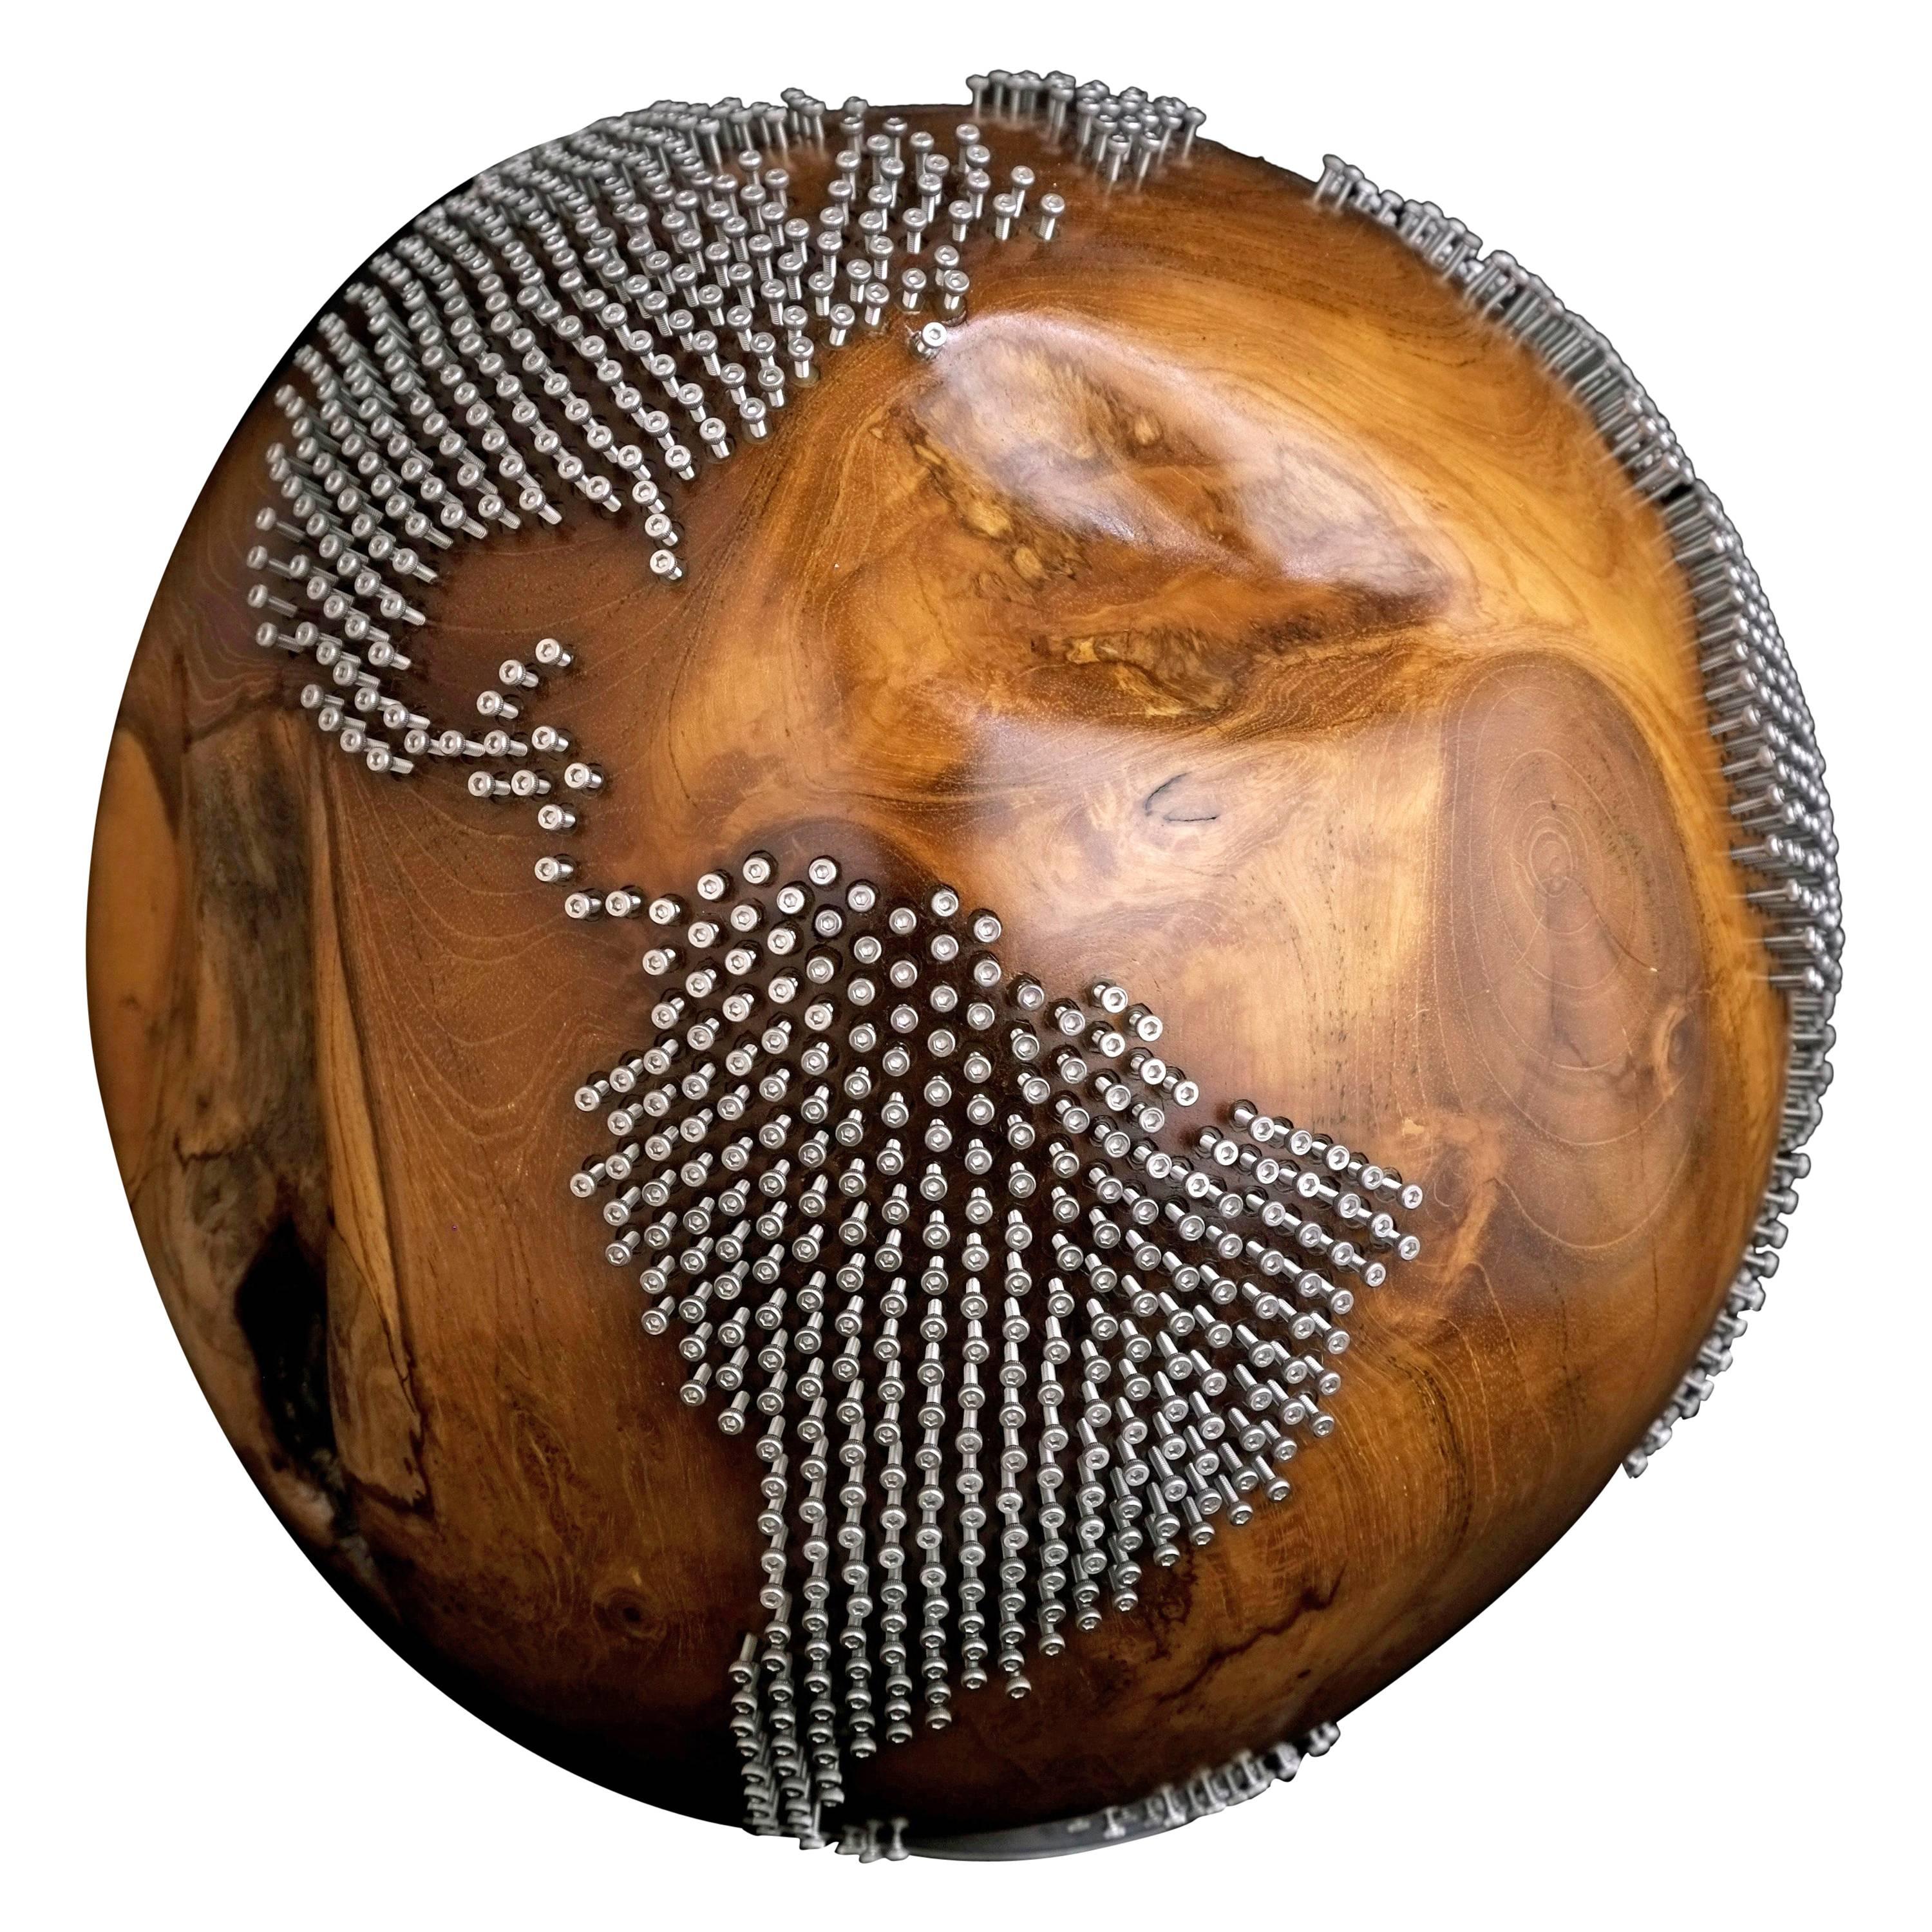 2147 Stainless Bolts for a Unique Wooden Globe, 30 cm